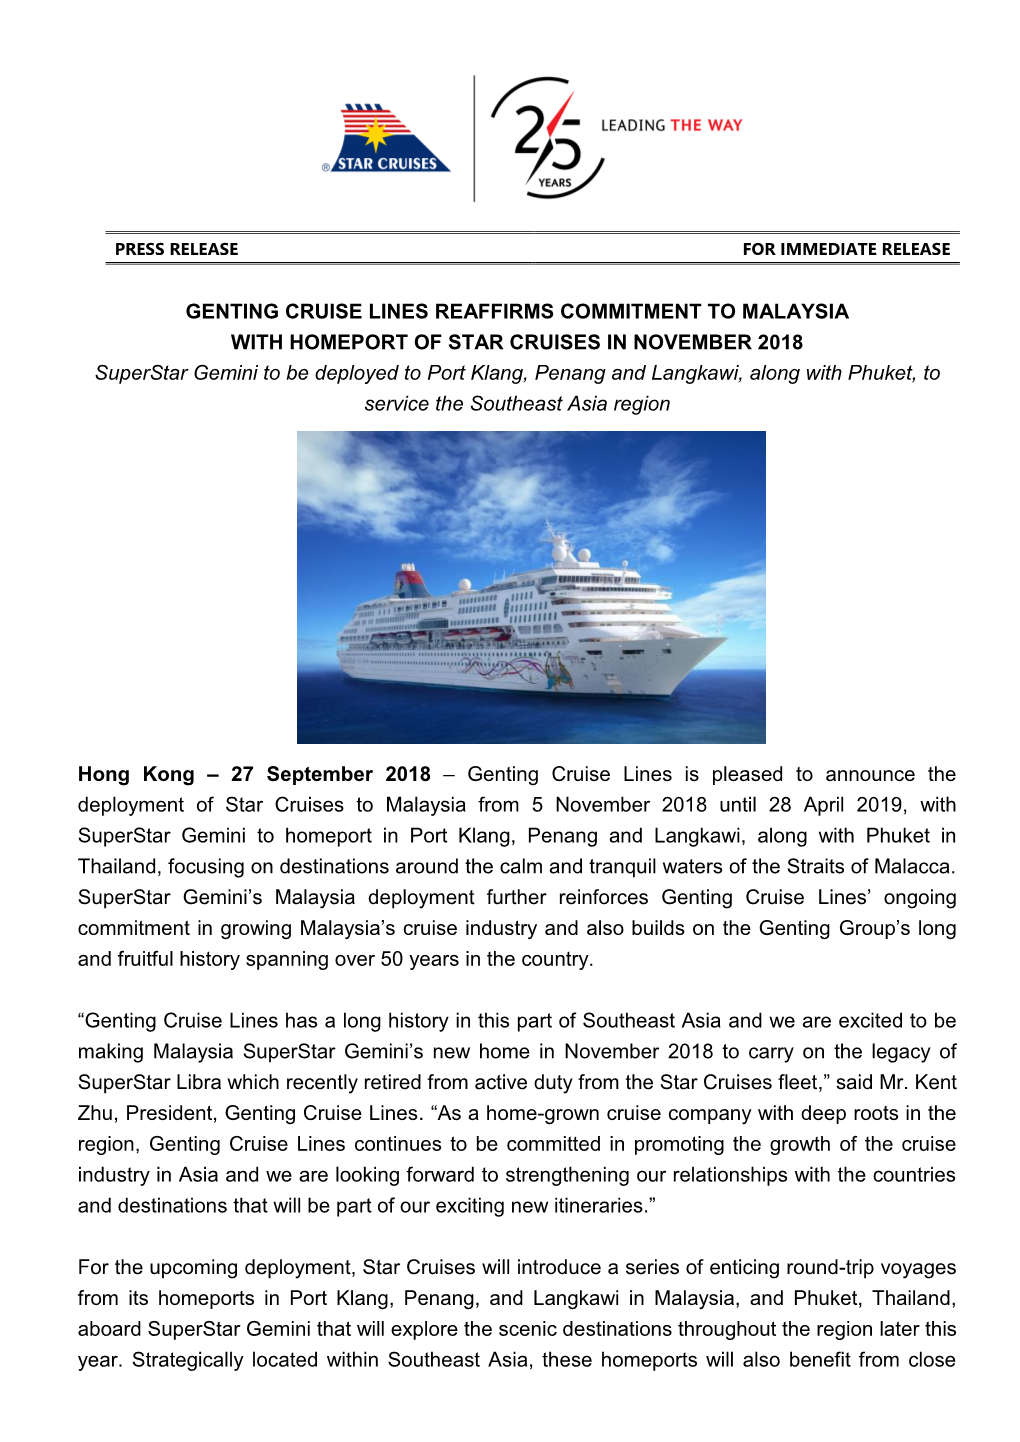 Genting Cruise Lines Reaffirms Commitment To